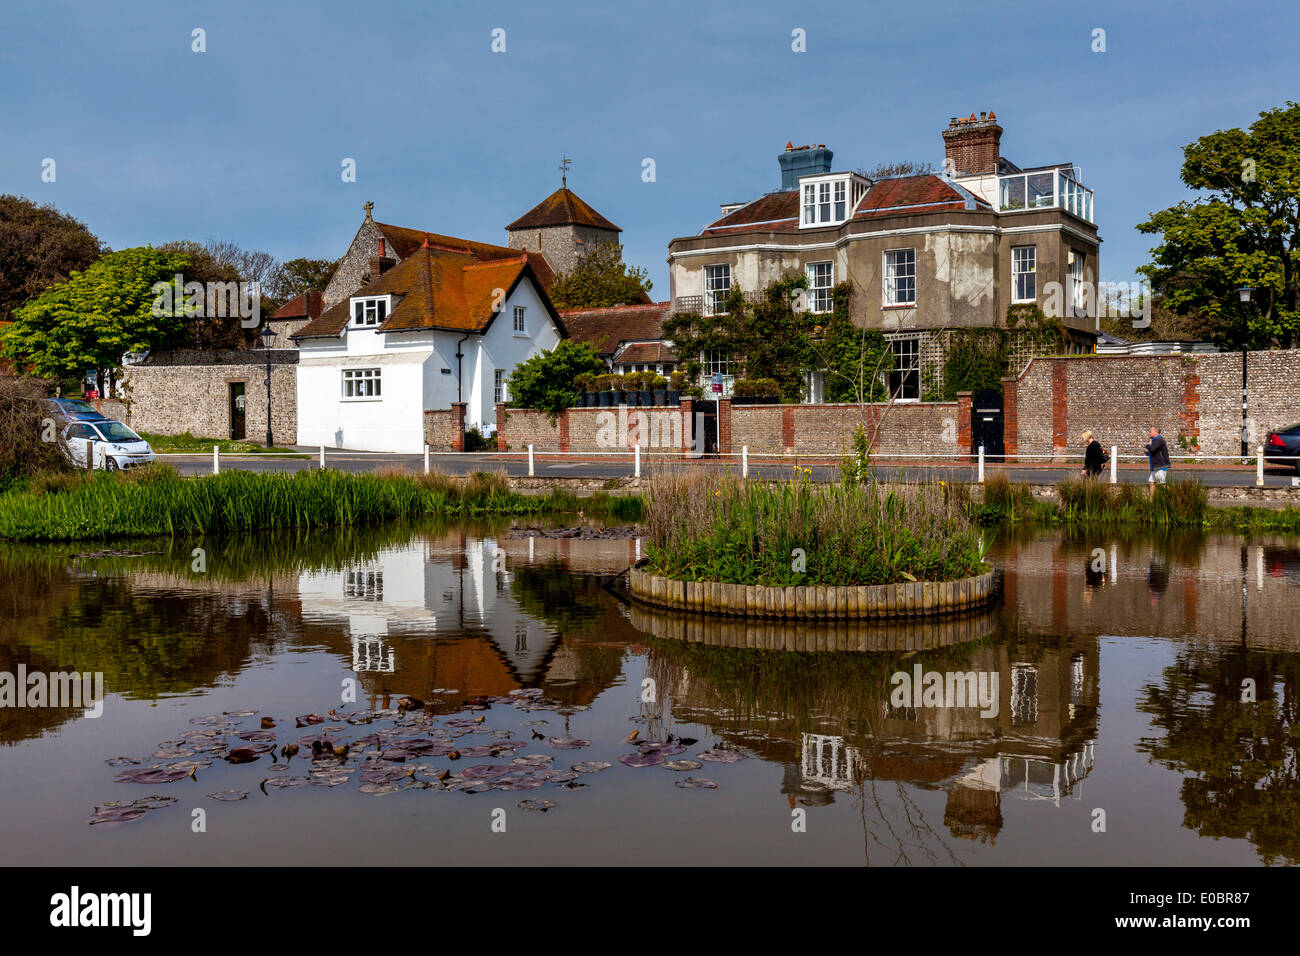 The Village Pond and Surrounding Houses, Rottingdean, Sussex, England Stock Photo